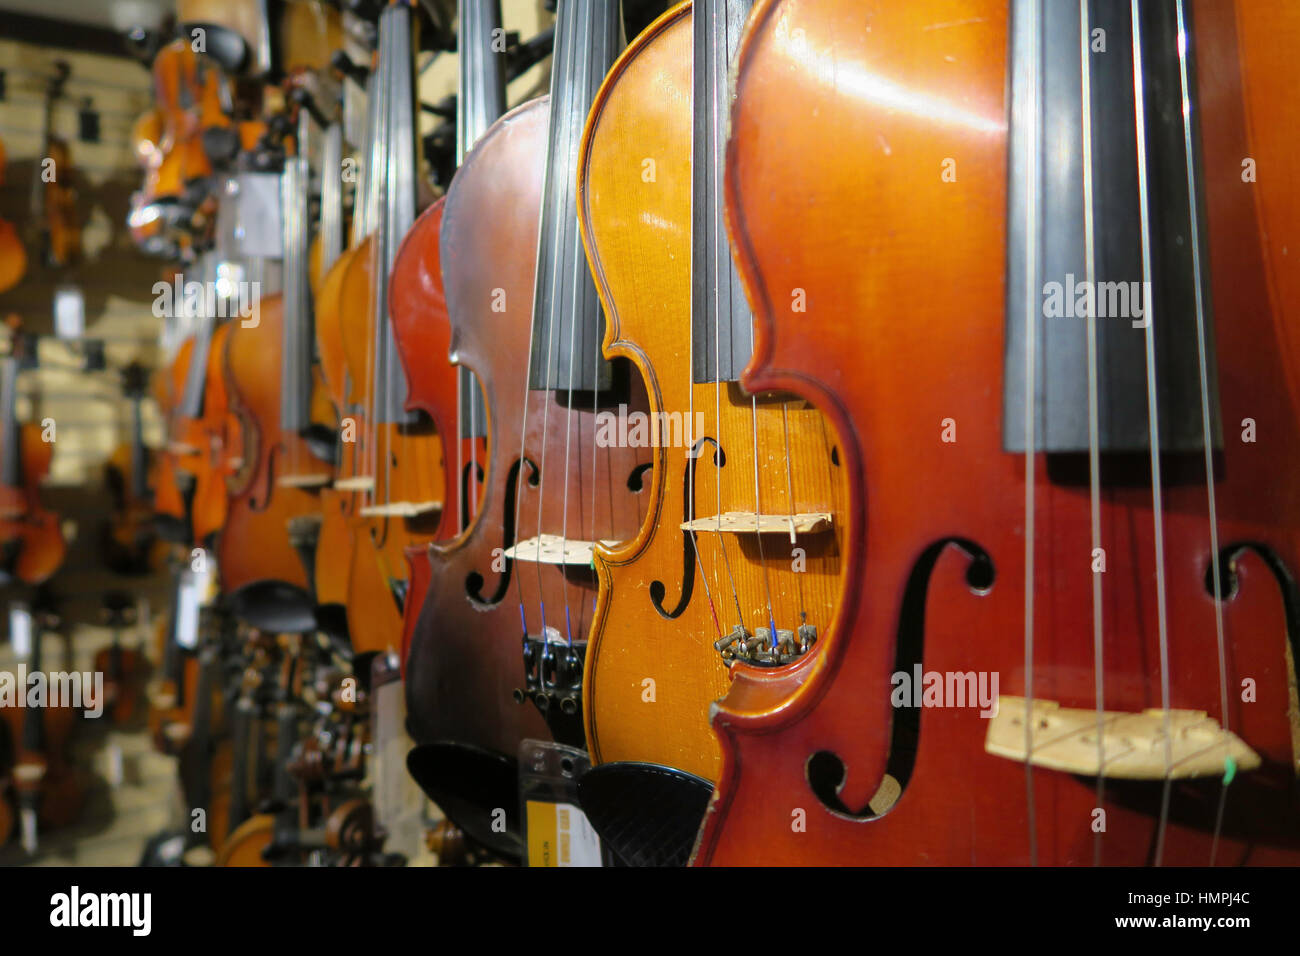 Violins, Sam Ash Music Superstore, 333 W.34th Street, NYC Stock Photo